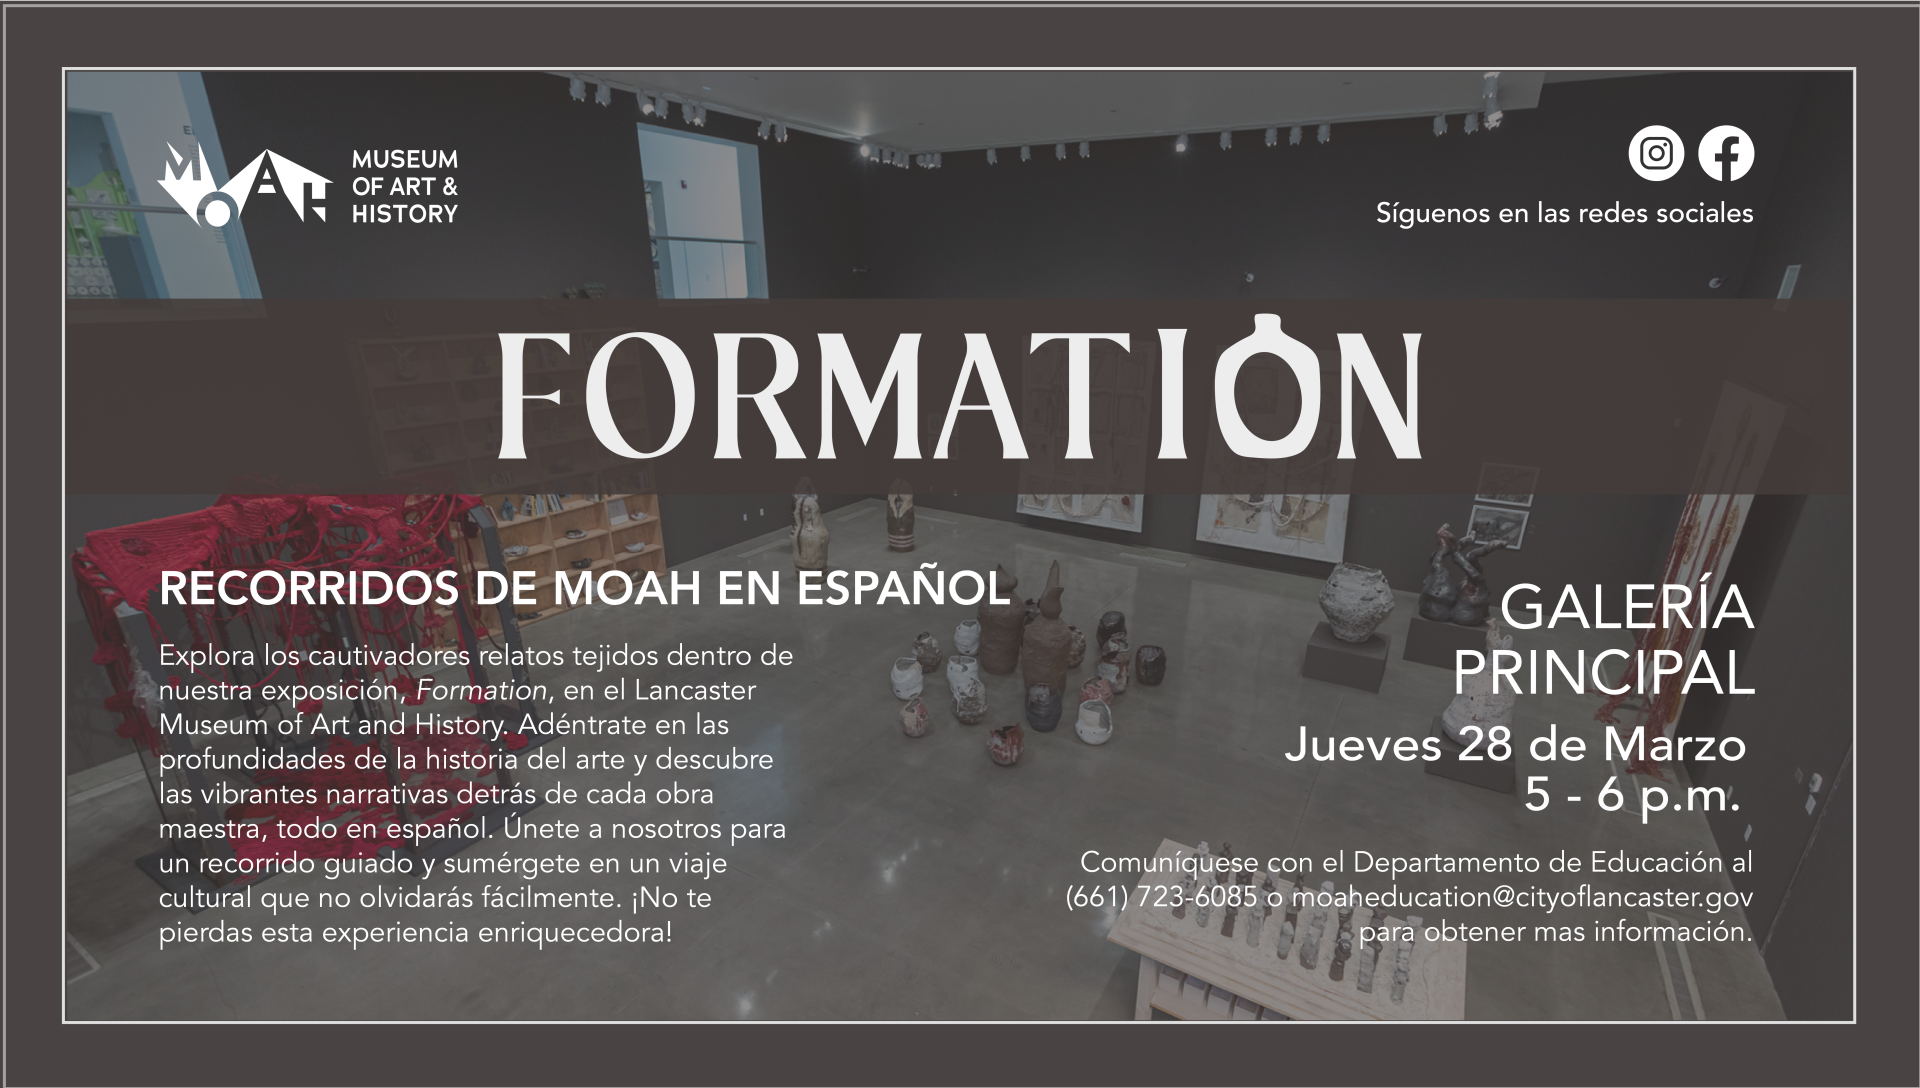 Spanish Language Guided Tour For MOAH’s Newest Exhibition